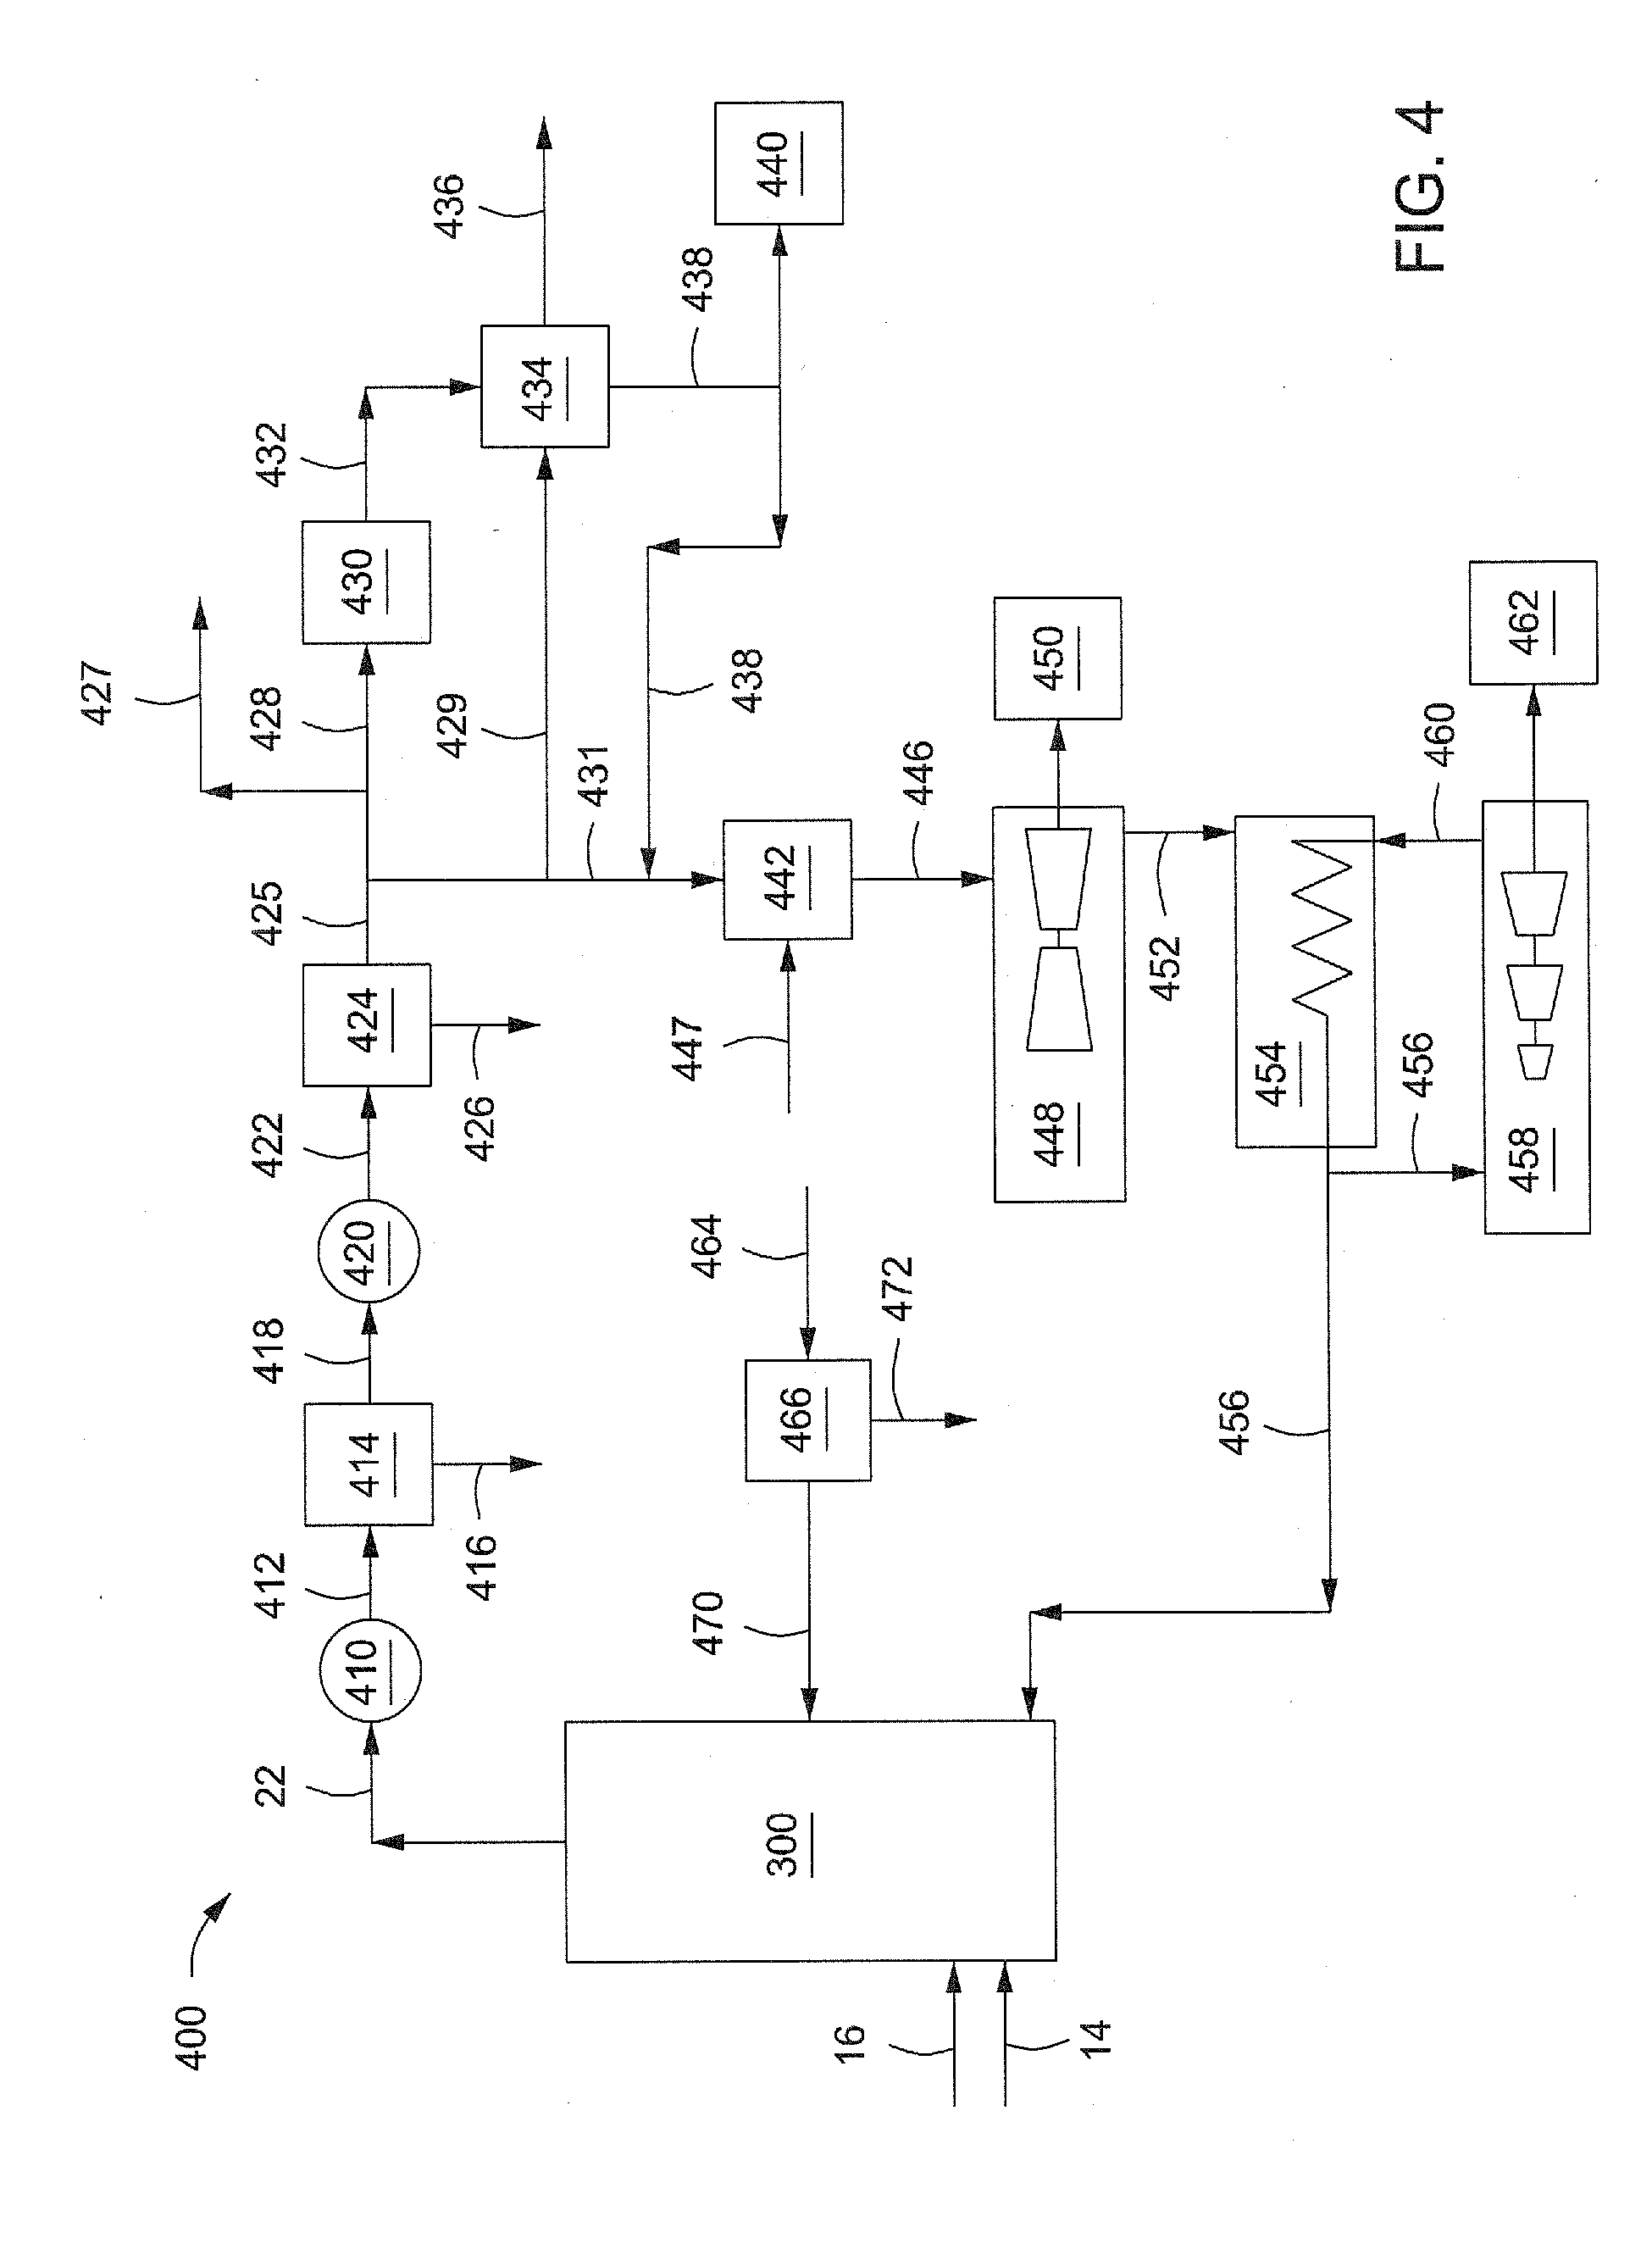 Systems and methods for gasifying a feedstock